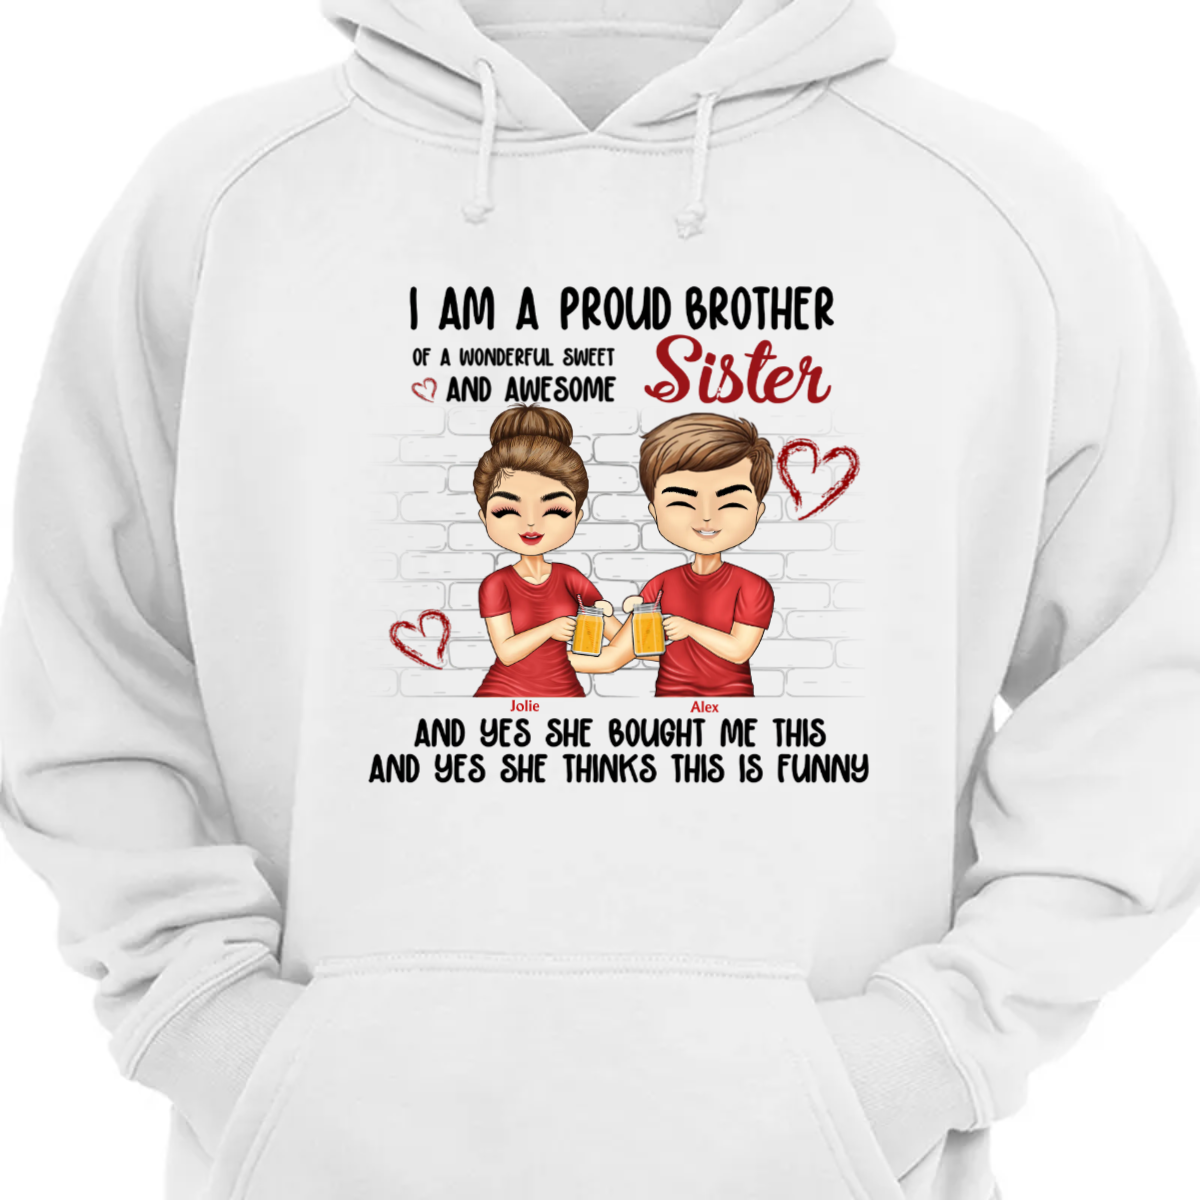 I’M A Proud Brother Of A Wonderful Sweet & Awesome Sister – Gift For Brothers, Sisters, Siblings – Personalized Custom Hoodie Sweatshirt